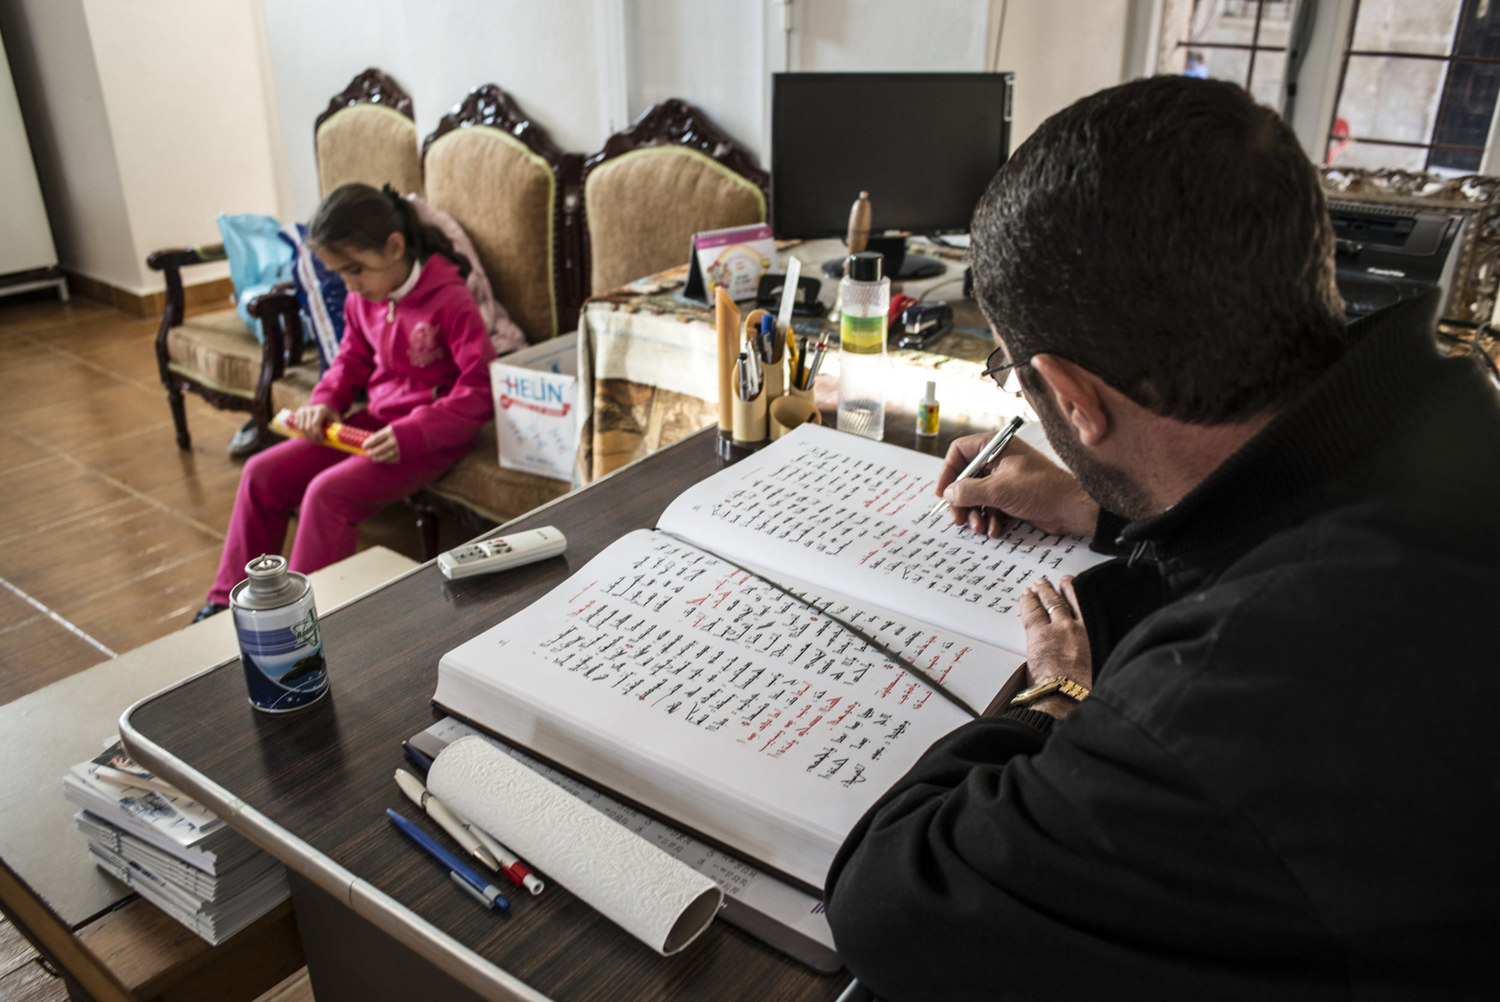  Decon Ayhan Gürkan reads from an Assyriac book before a church service at Mor Barsaumo church on October 31st, 2014.

The Mor Barsaumo church is over 1,500 years old and was renovated in 1943. It is located 21 Şen Caddessi in Midyat, Turkey. 